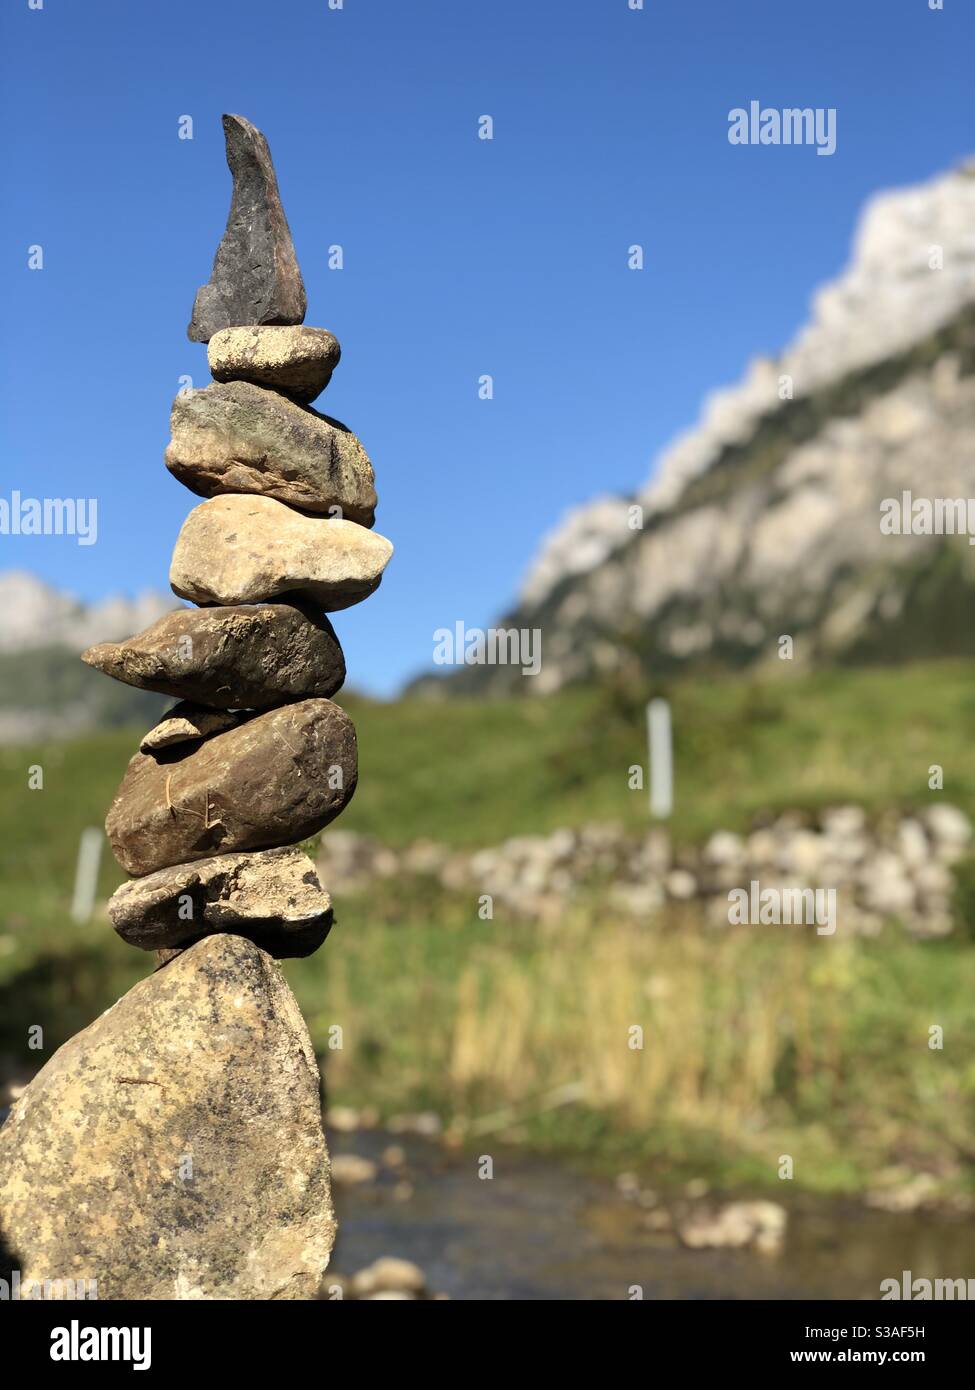 Up in a Switzerland mountains, along the river. Stock Photo